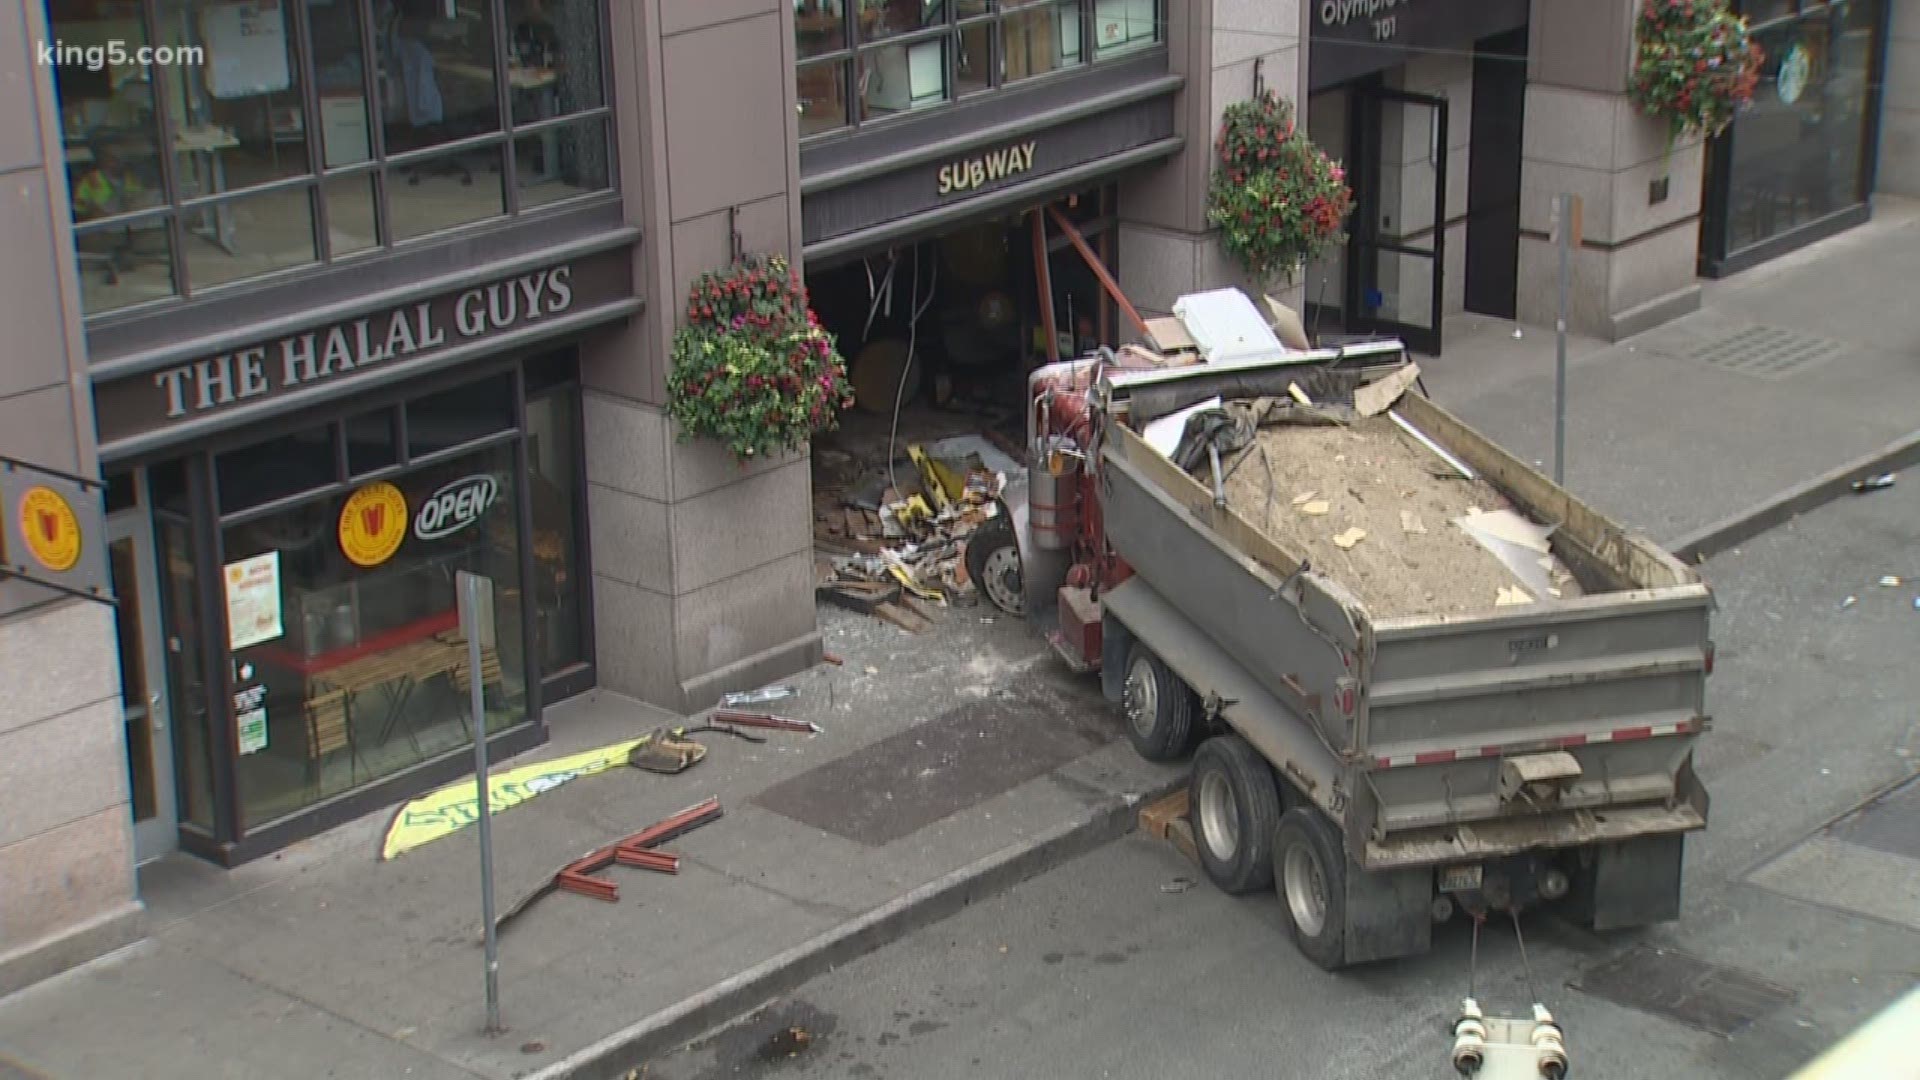 A dump truck had an apparent mechanical failure before it hit pedestrian, several vehicles, and slammed into a sandwich shop, according to Seattle police. KING 5's Michael Crowe reports on safety issues raised by the dramatic incident.